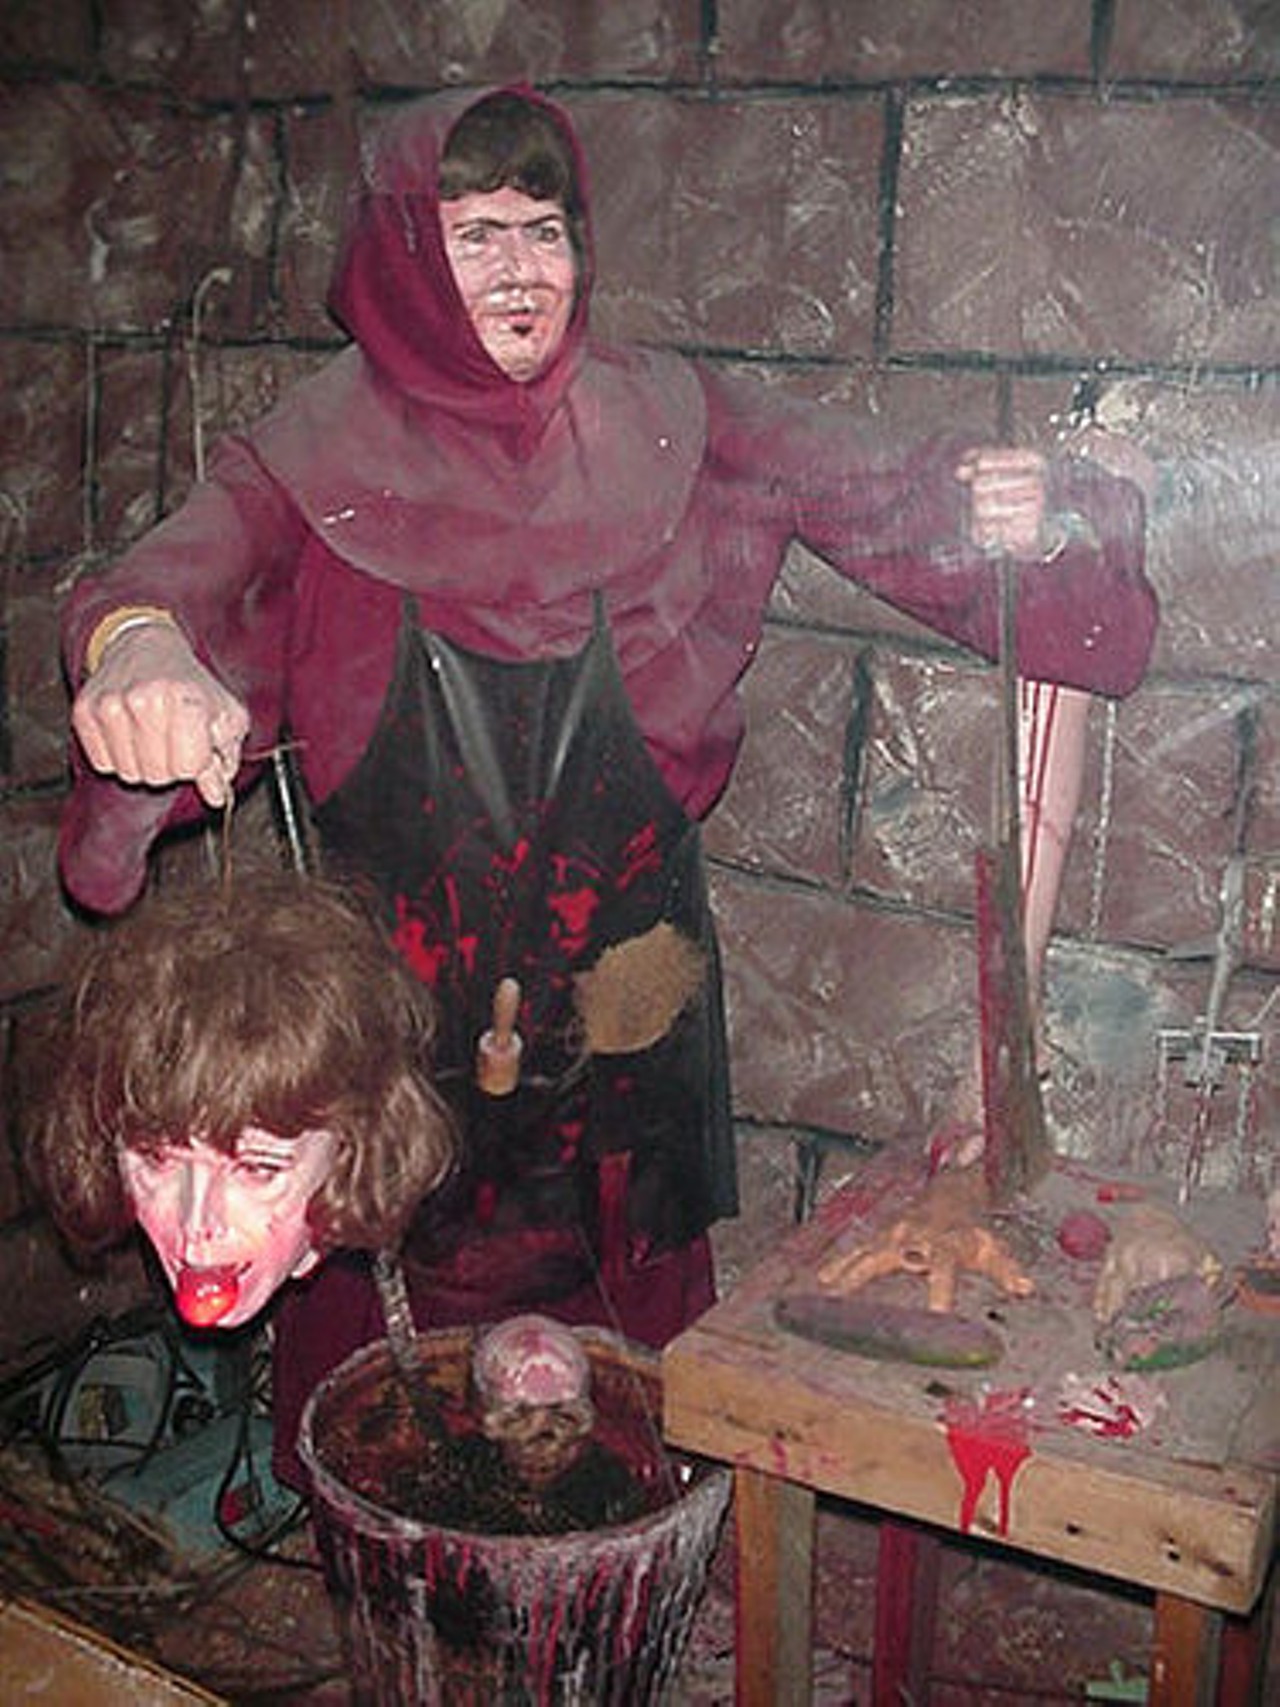 This witch with her decapitated head probably scared a lot of little kids. (image via bigfloridacountry.com)